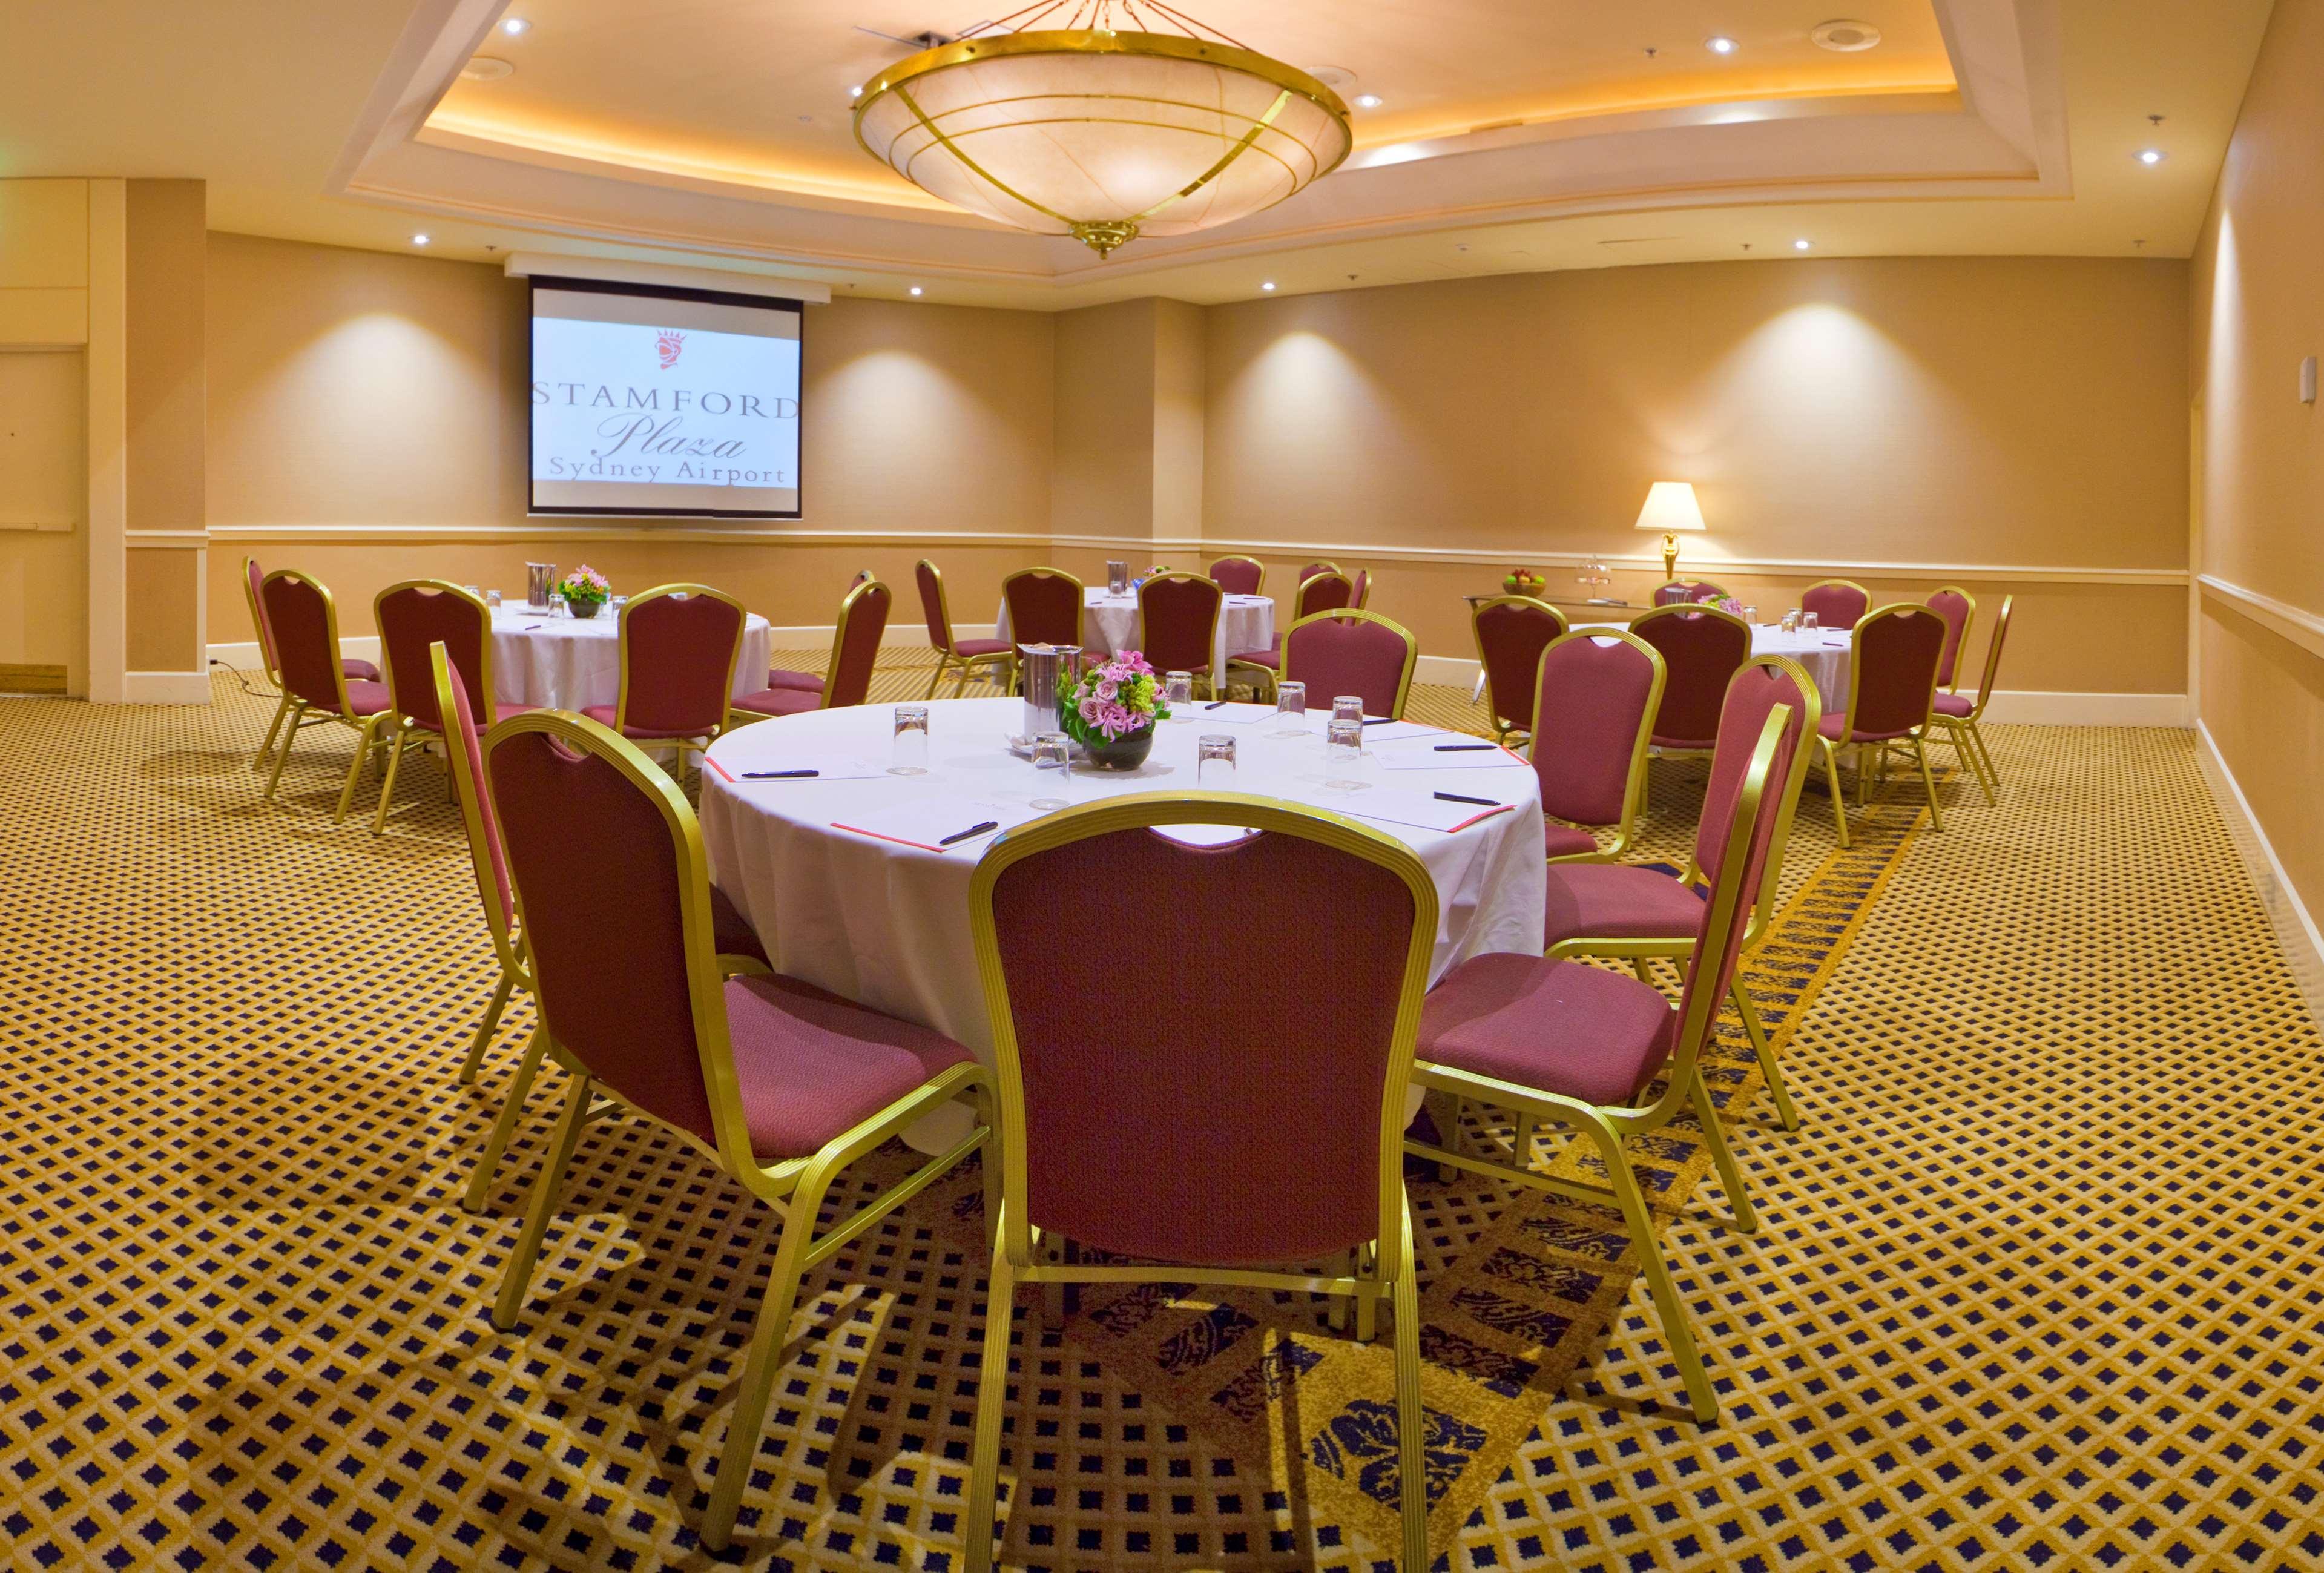 Stamford Plaza Sydney Airport Hotel & Conference Centre Business photo